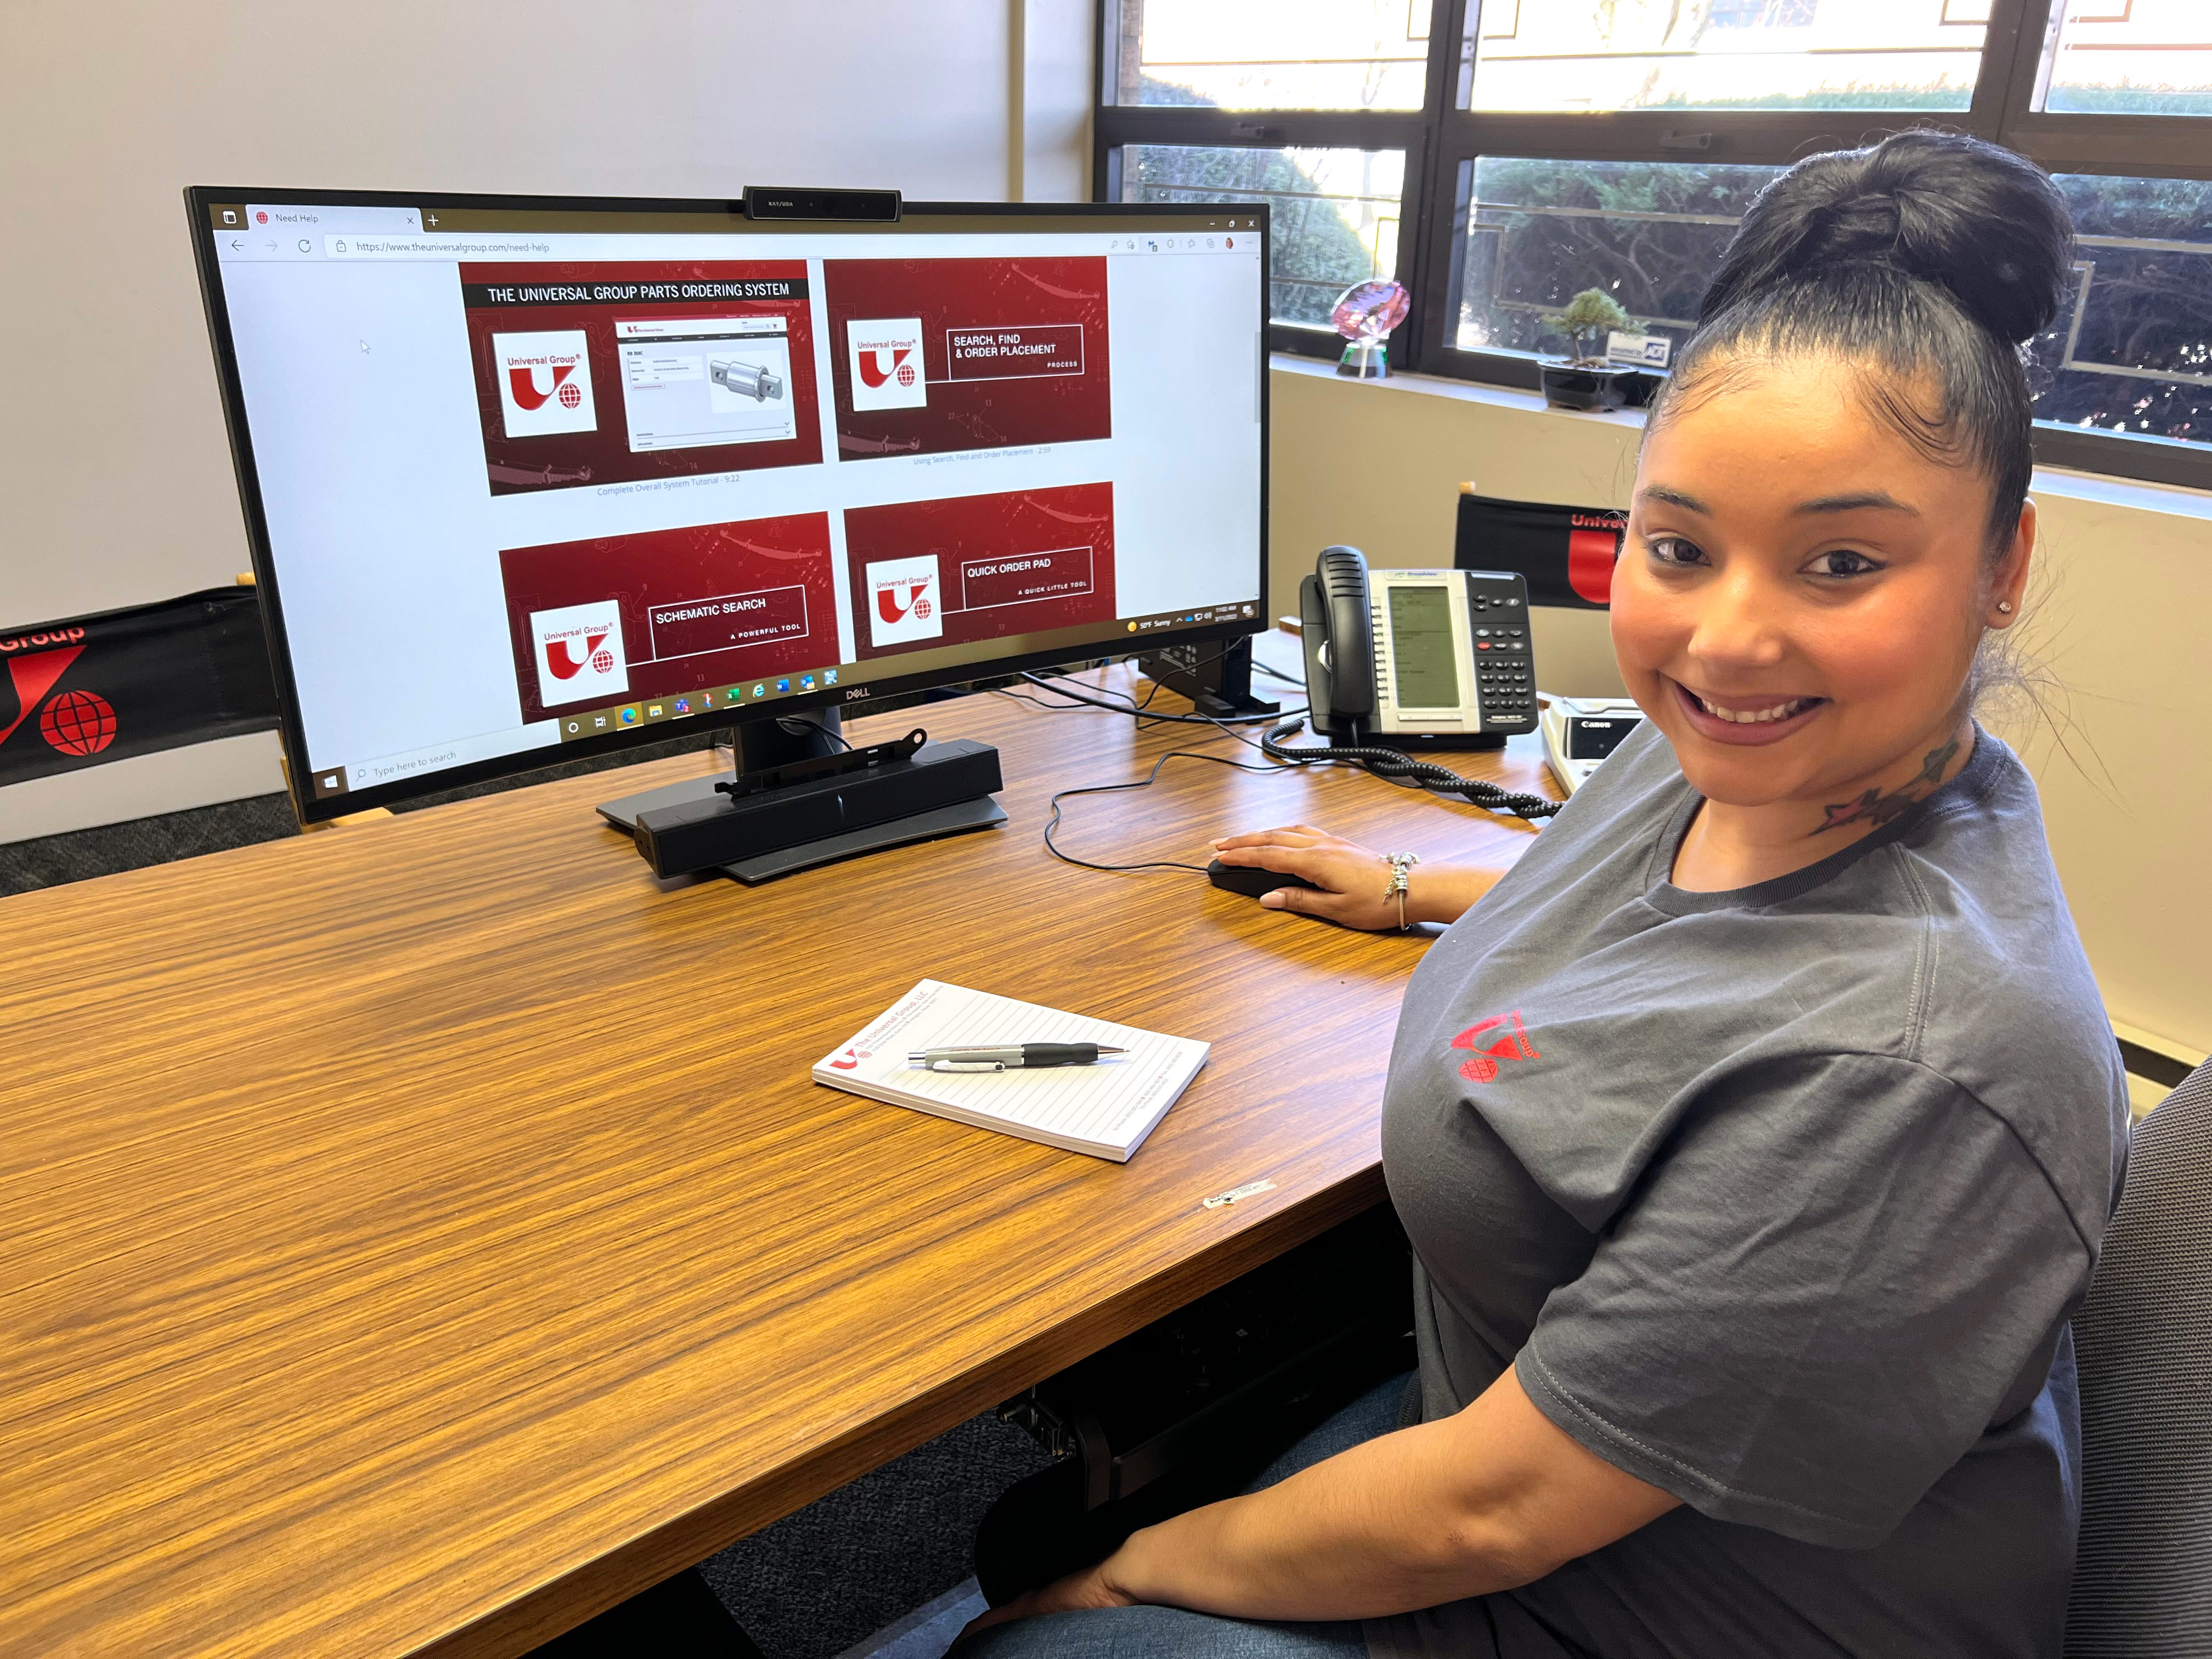 Julissa Cosme Sales Support Representative with new helpful videos from The Universal Group